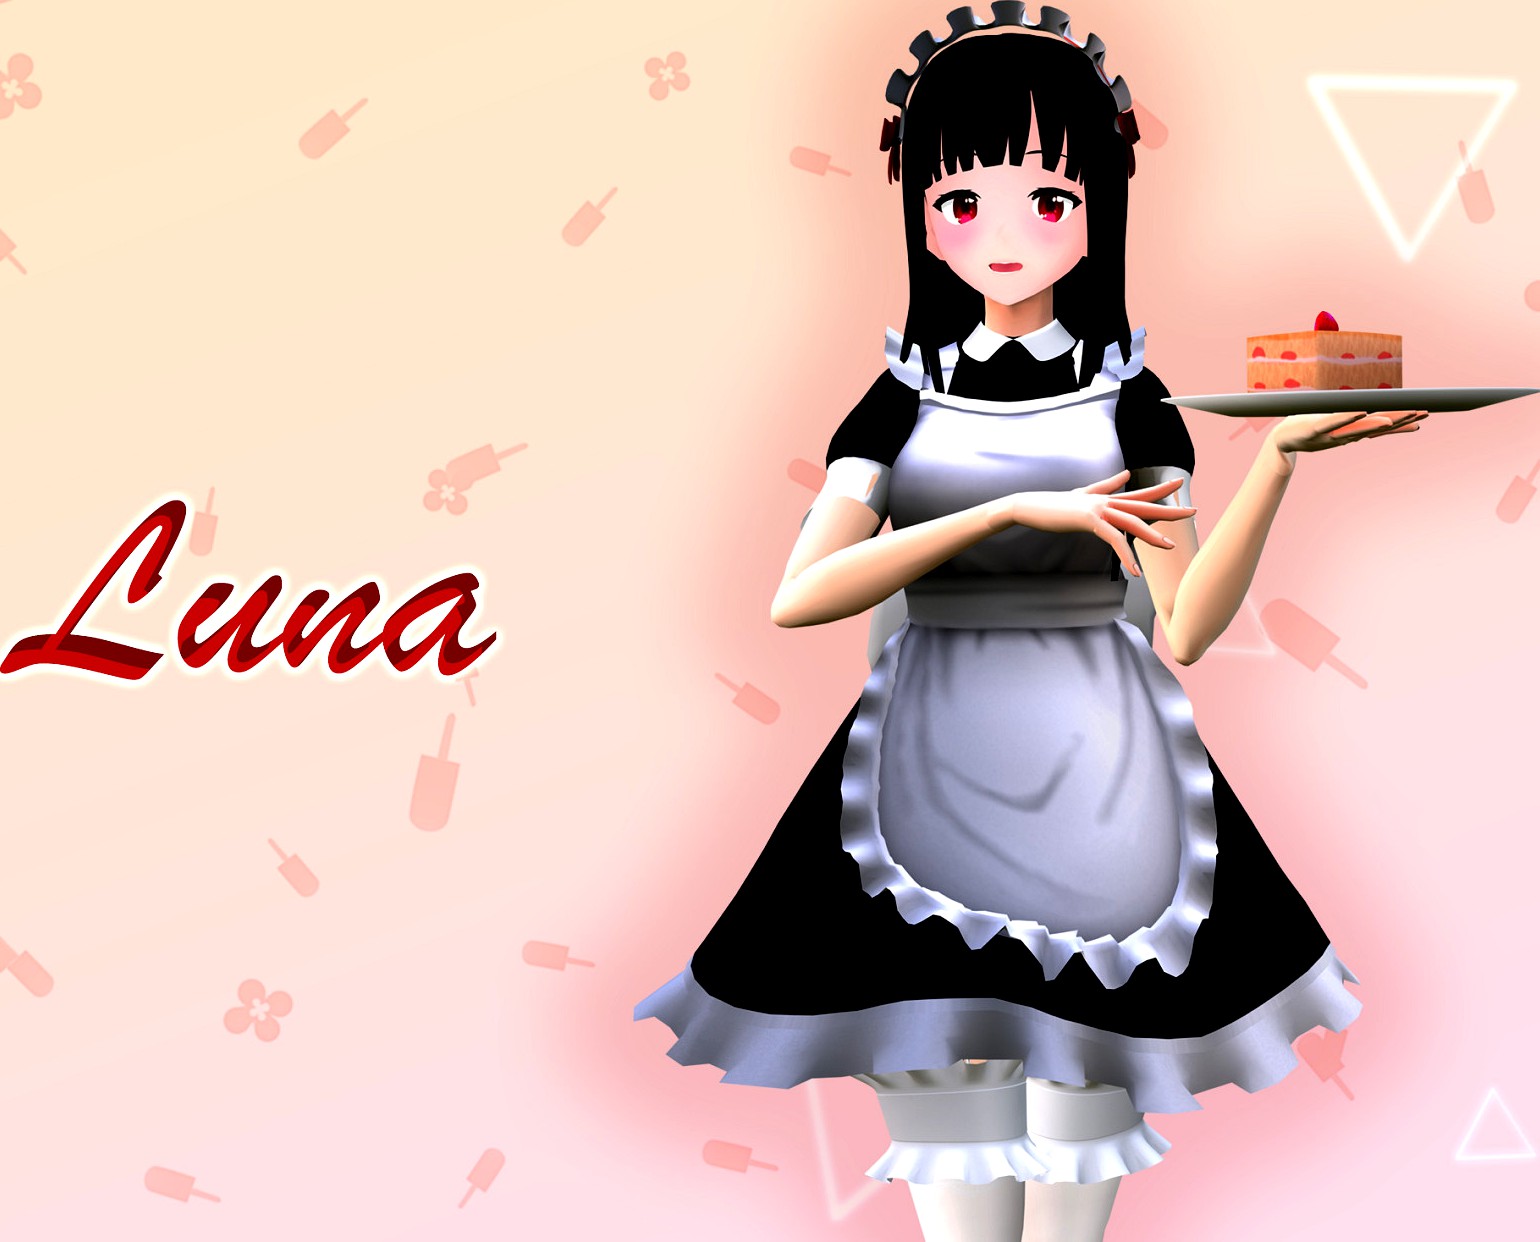 Luna Maid: Anime-Style Character For Games And VRChat